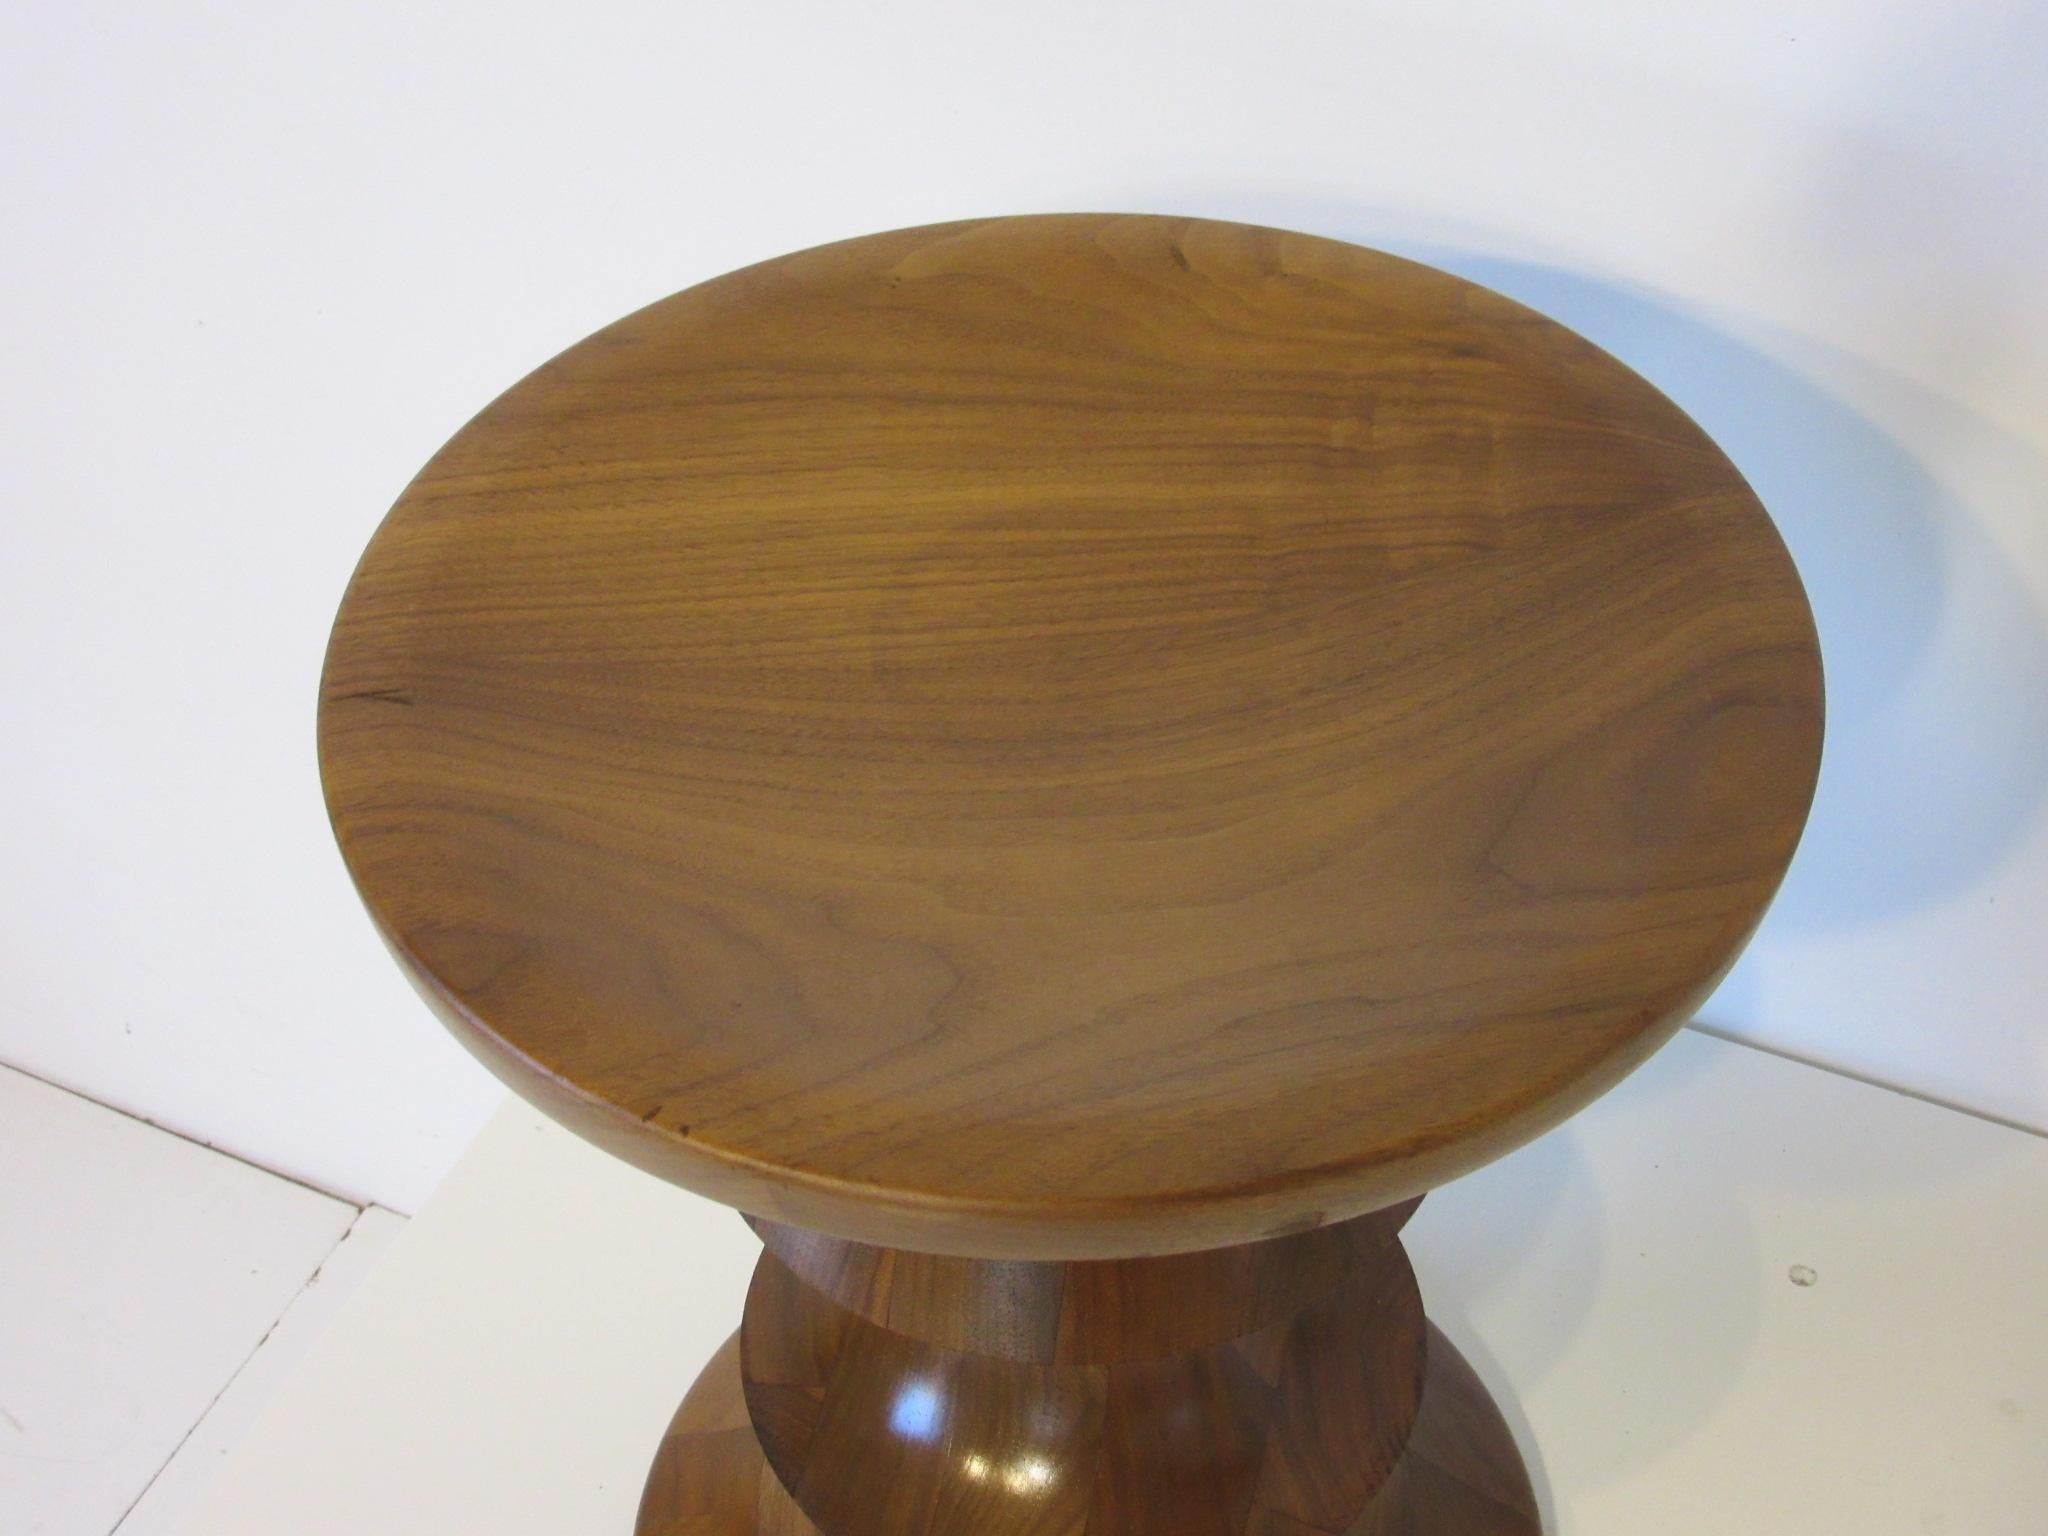 20th Century Eames American Walnut Time Life Stool / End Table for Herman Miller